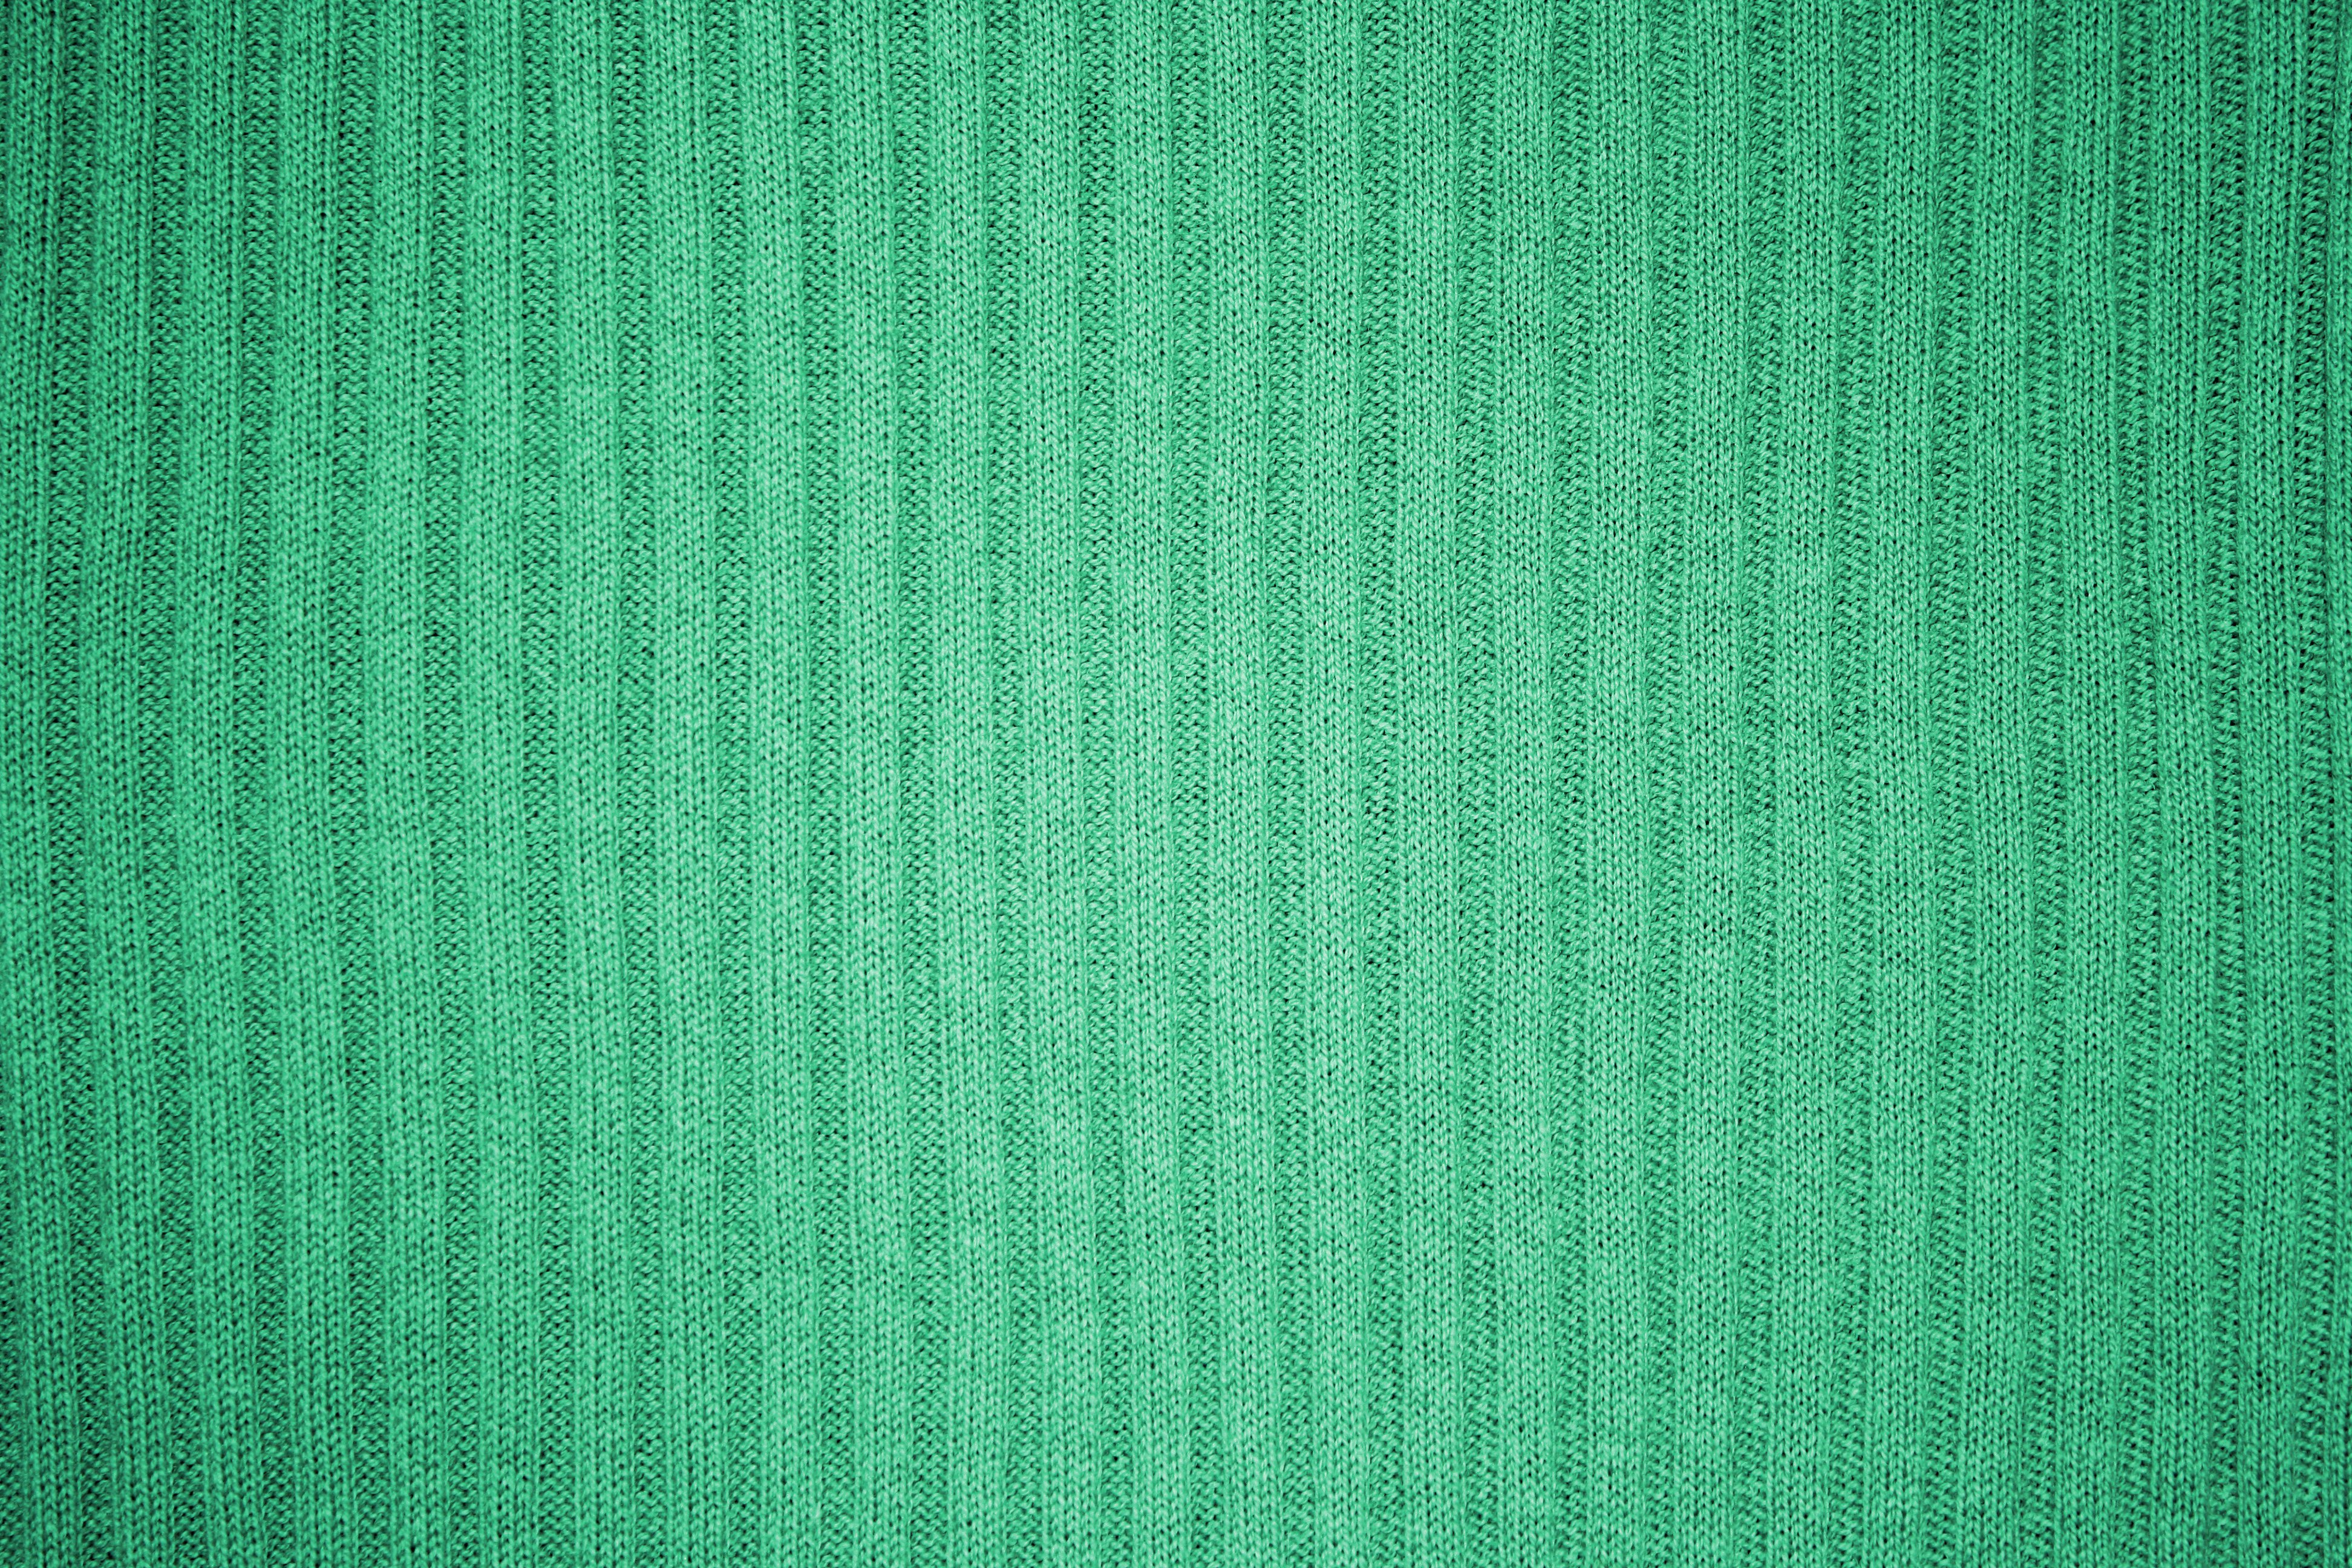 Green Ribbed Knit Fabric Texture Picture, Free Photograph